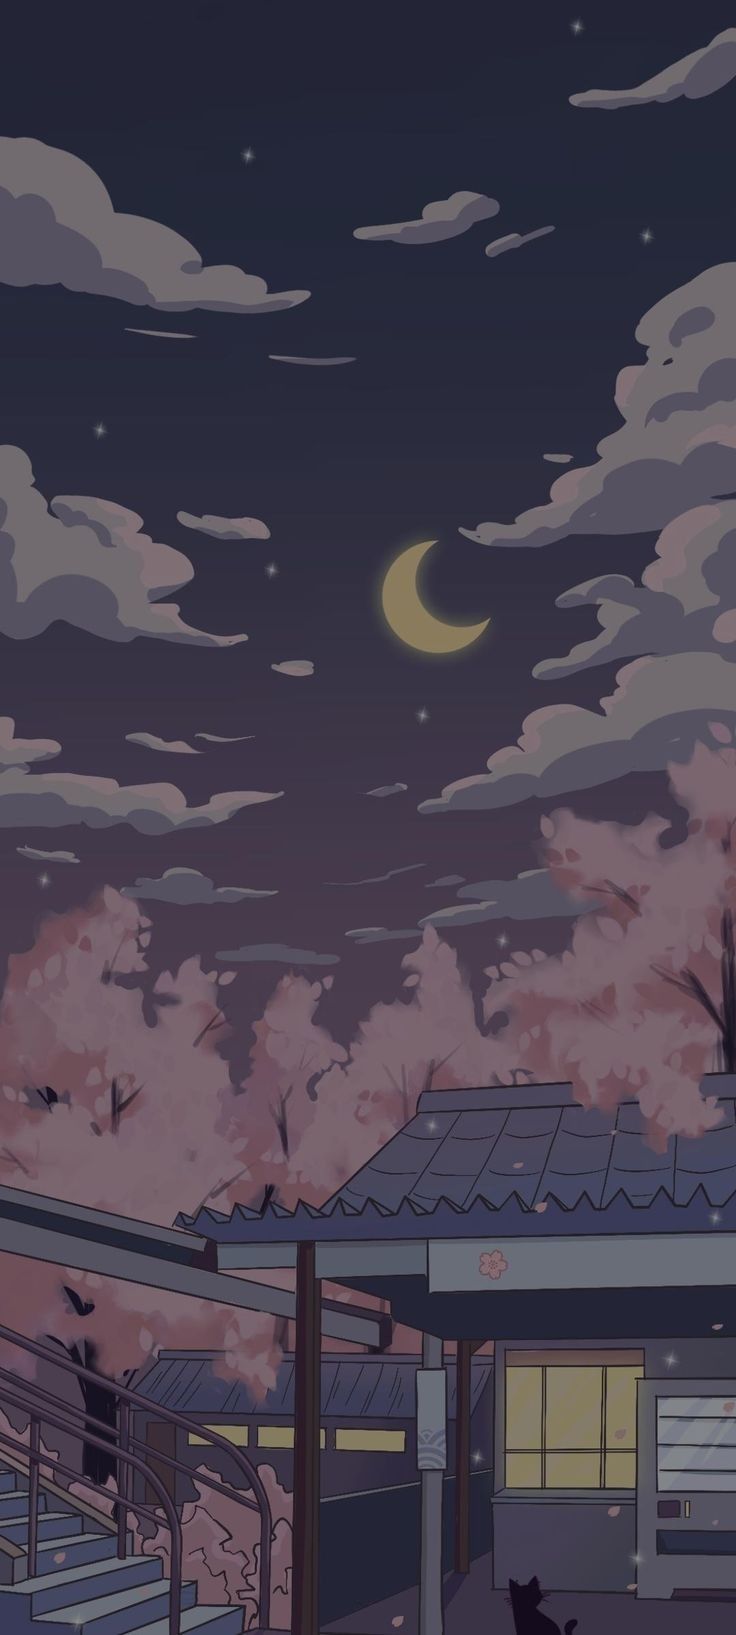 I like how room in anime always look cozy and comfy. | Anime wallpaper  1920x1080, Anime scenery wallpaper, Anime scenery